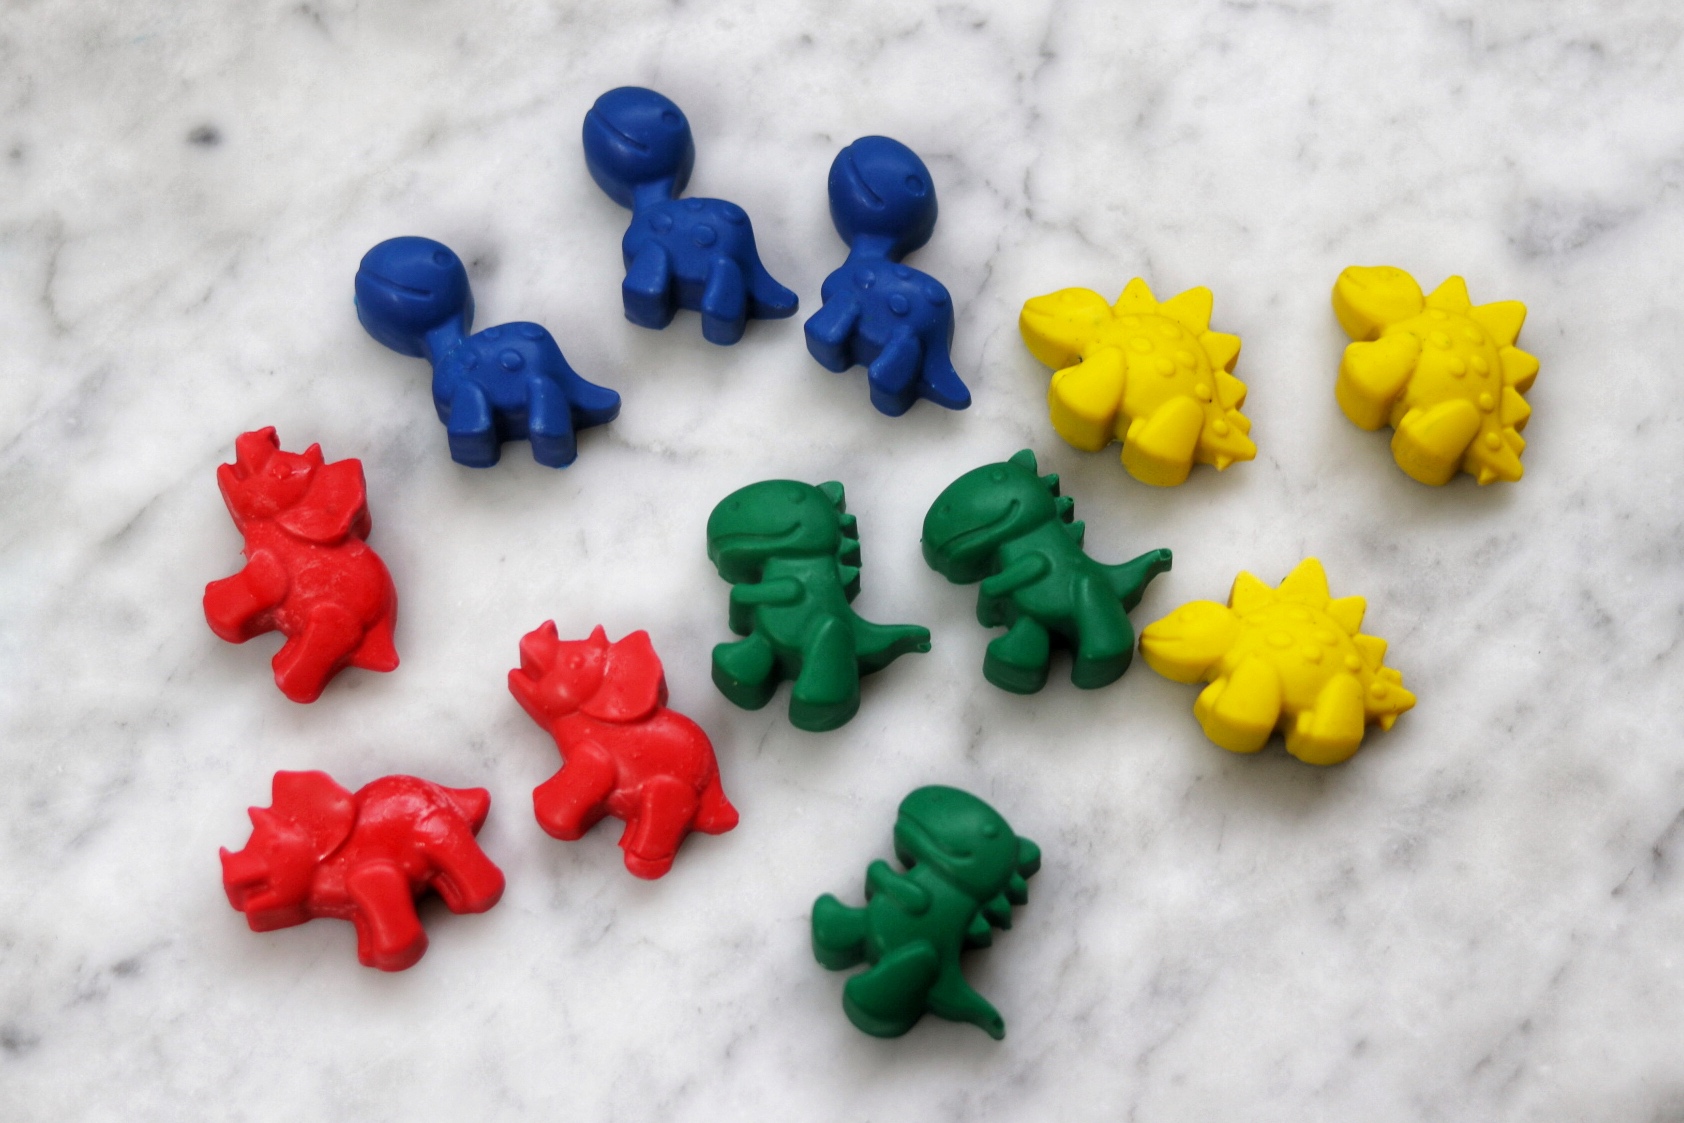 How to make Fun Shape Crayons from Silicone Molds